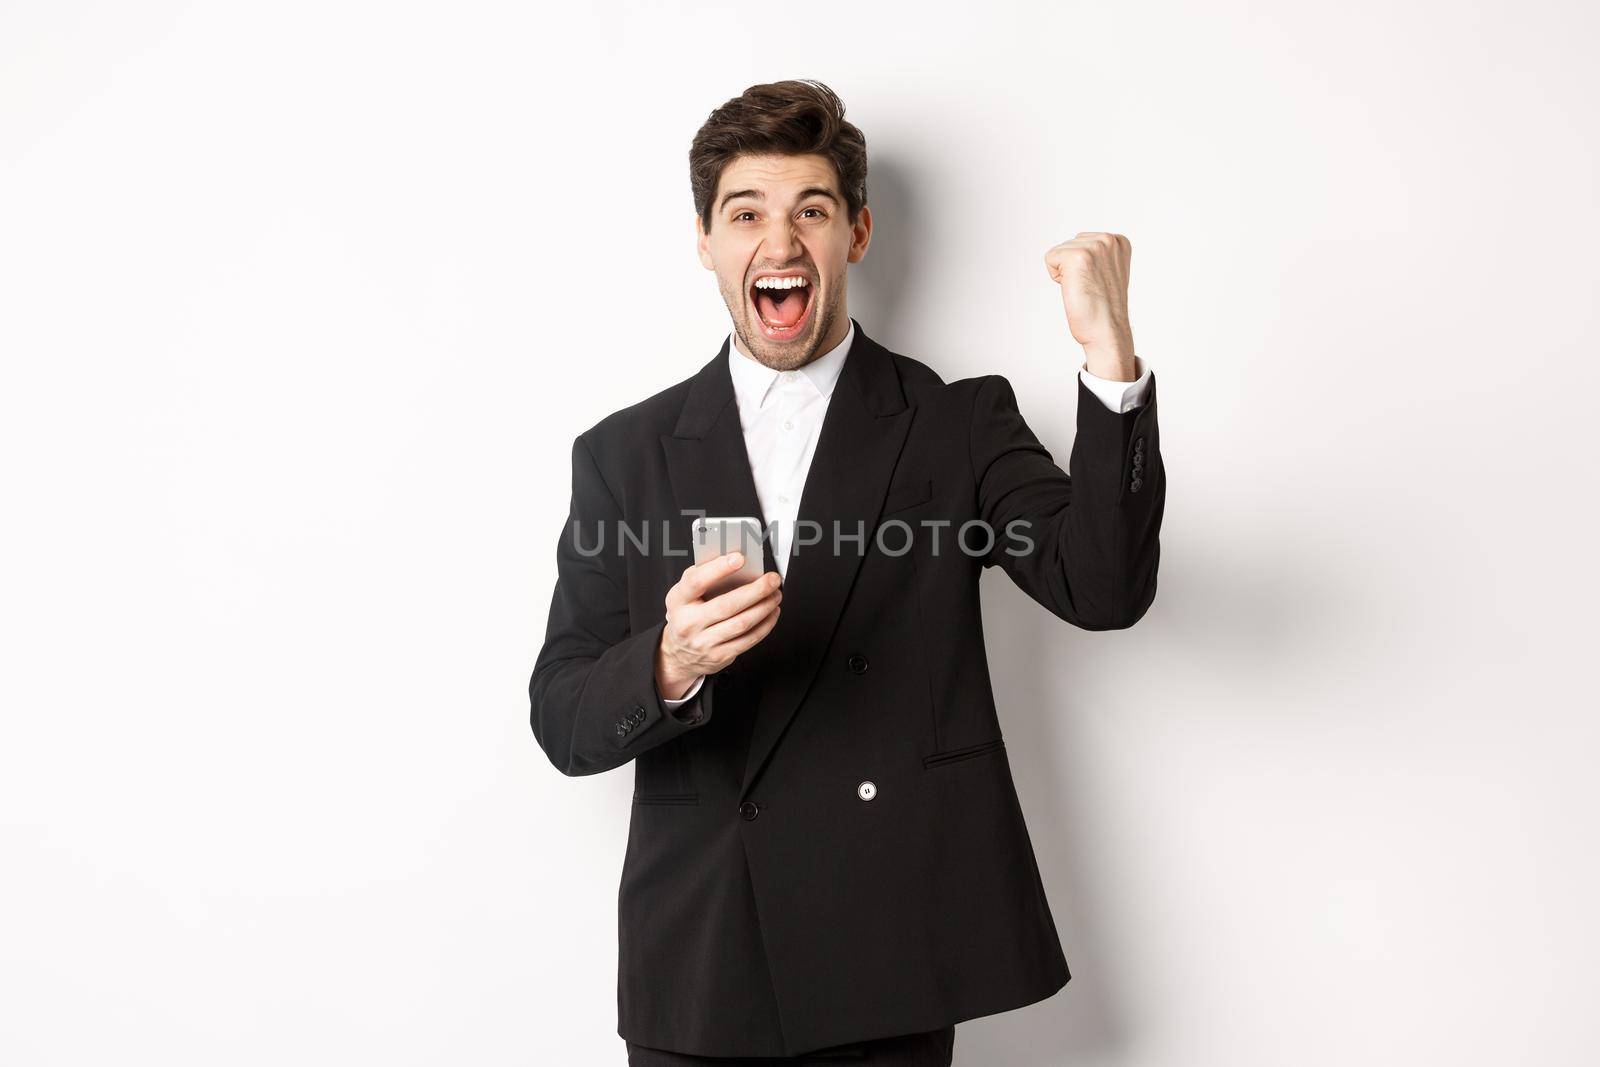 Portrait of happy handsome man in suit, rejoicing, achieve goal on mobile app, raising fist up and shouting yes, holding smartphone, standing against white background.